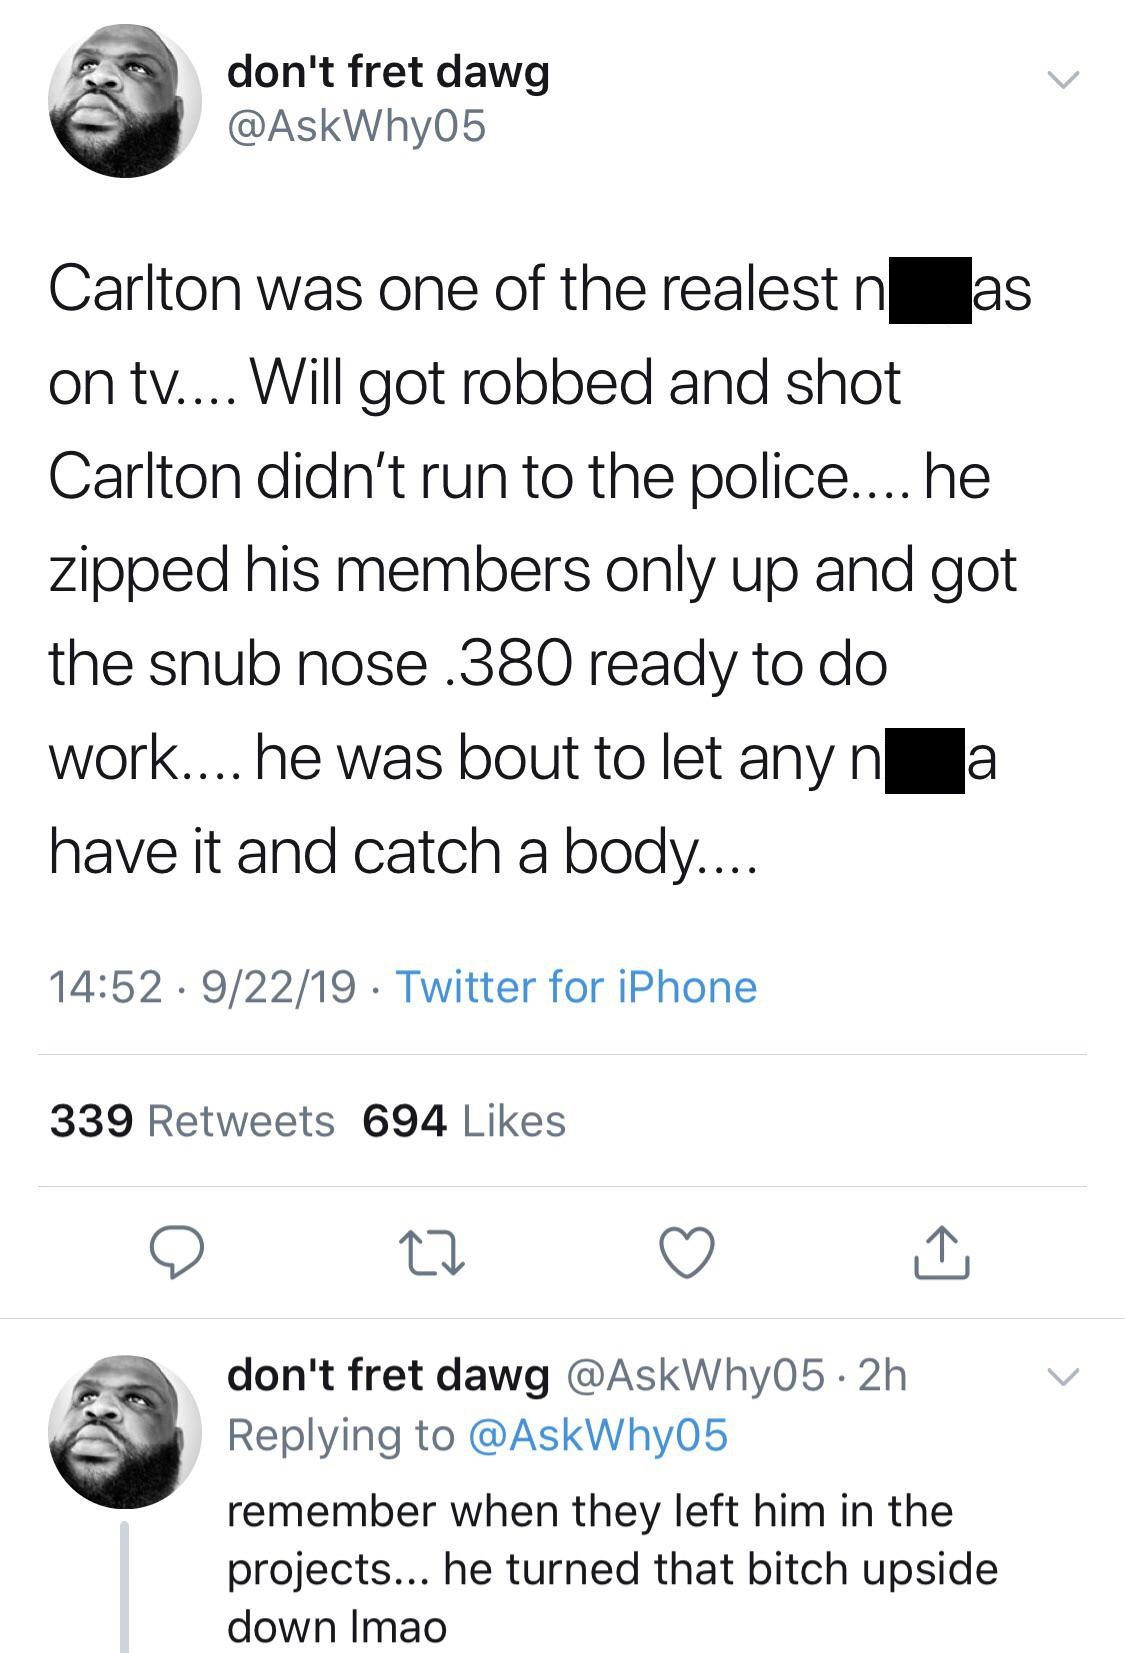 black twitter - don't fret dawg Carlton was one of the realest n as on tv.... Will got robbed and shot Carlton didn't run to the police.... he zipped his members only up and got the snub nose.380 ready to do work.... he was bout to let any n a have it and